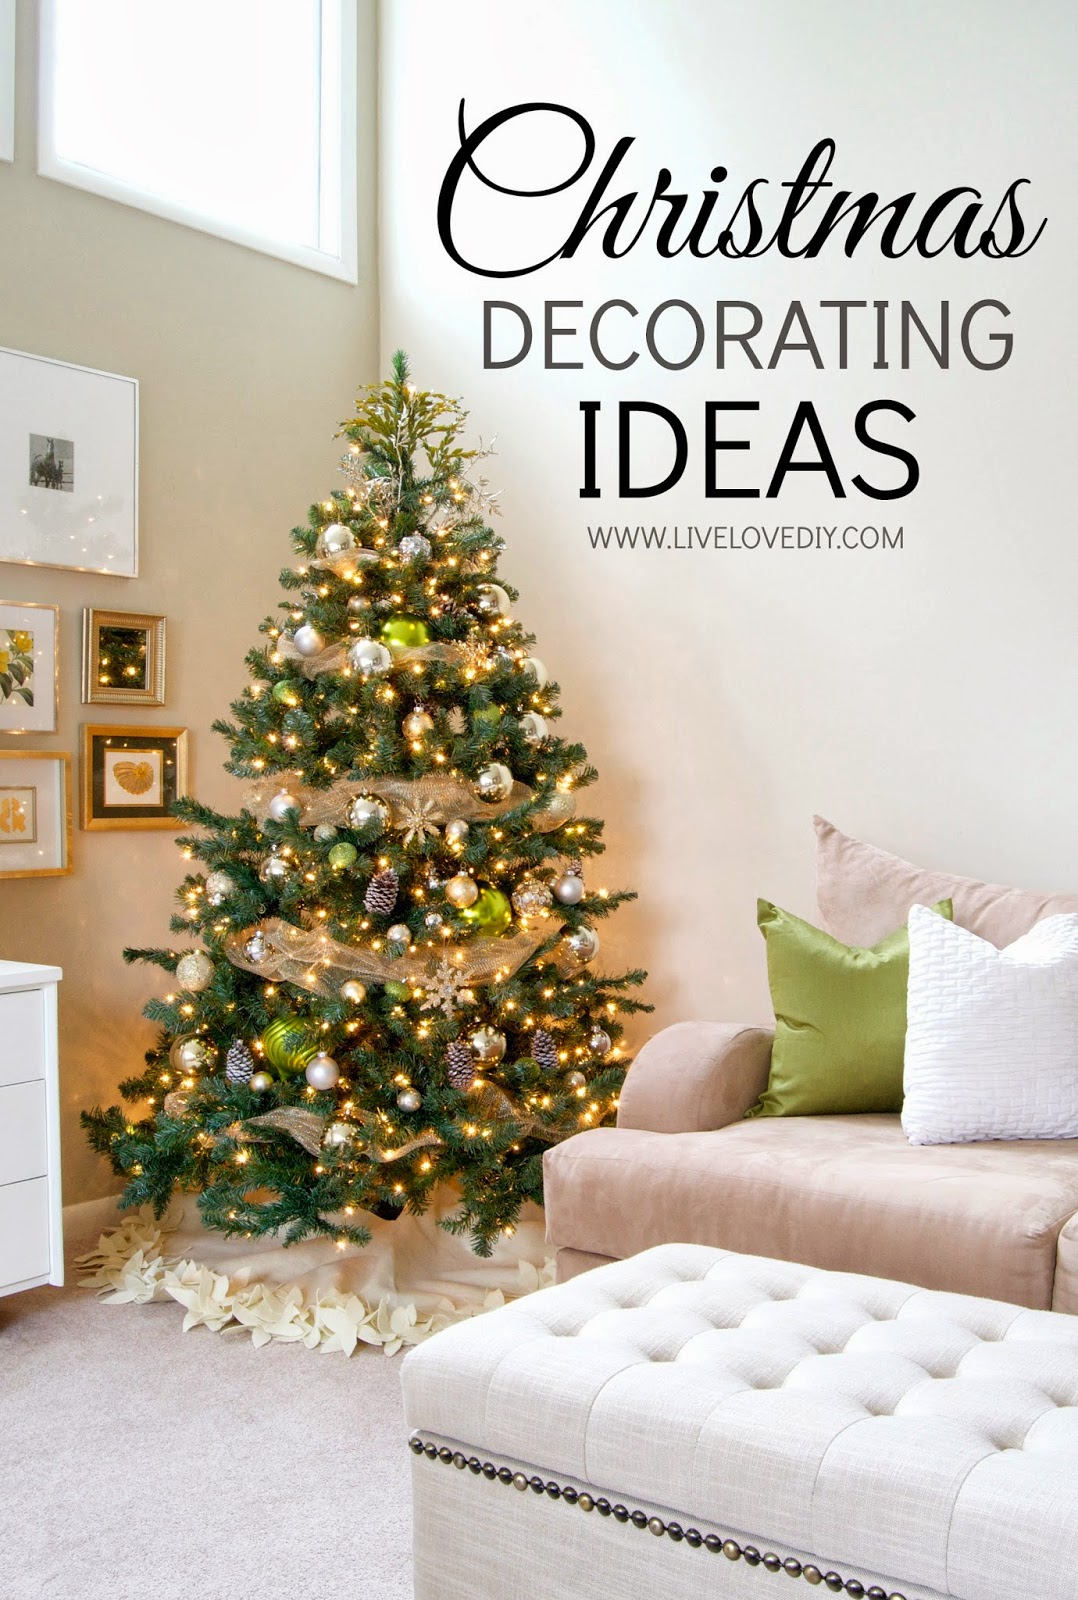 Christmas decorating ideas that you can make yourself This post is full of DIY ideas